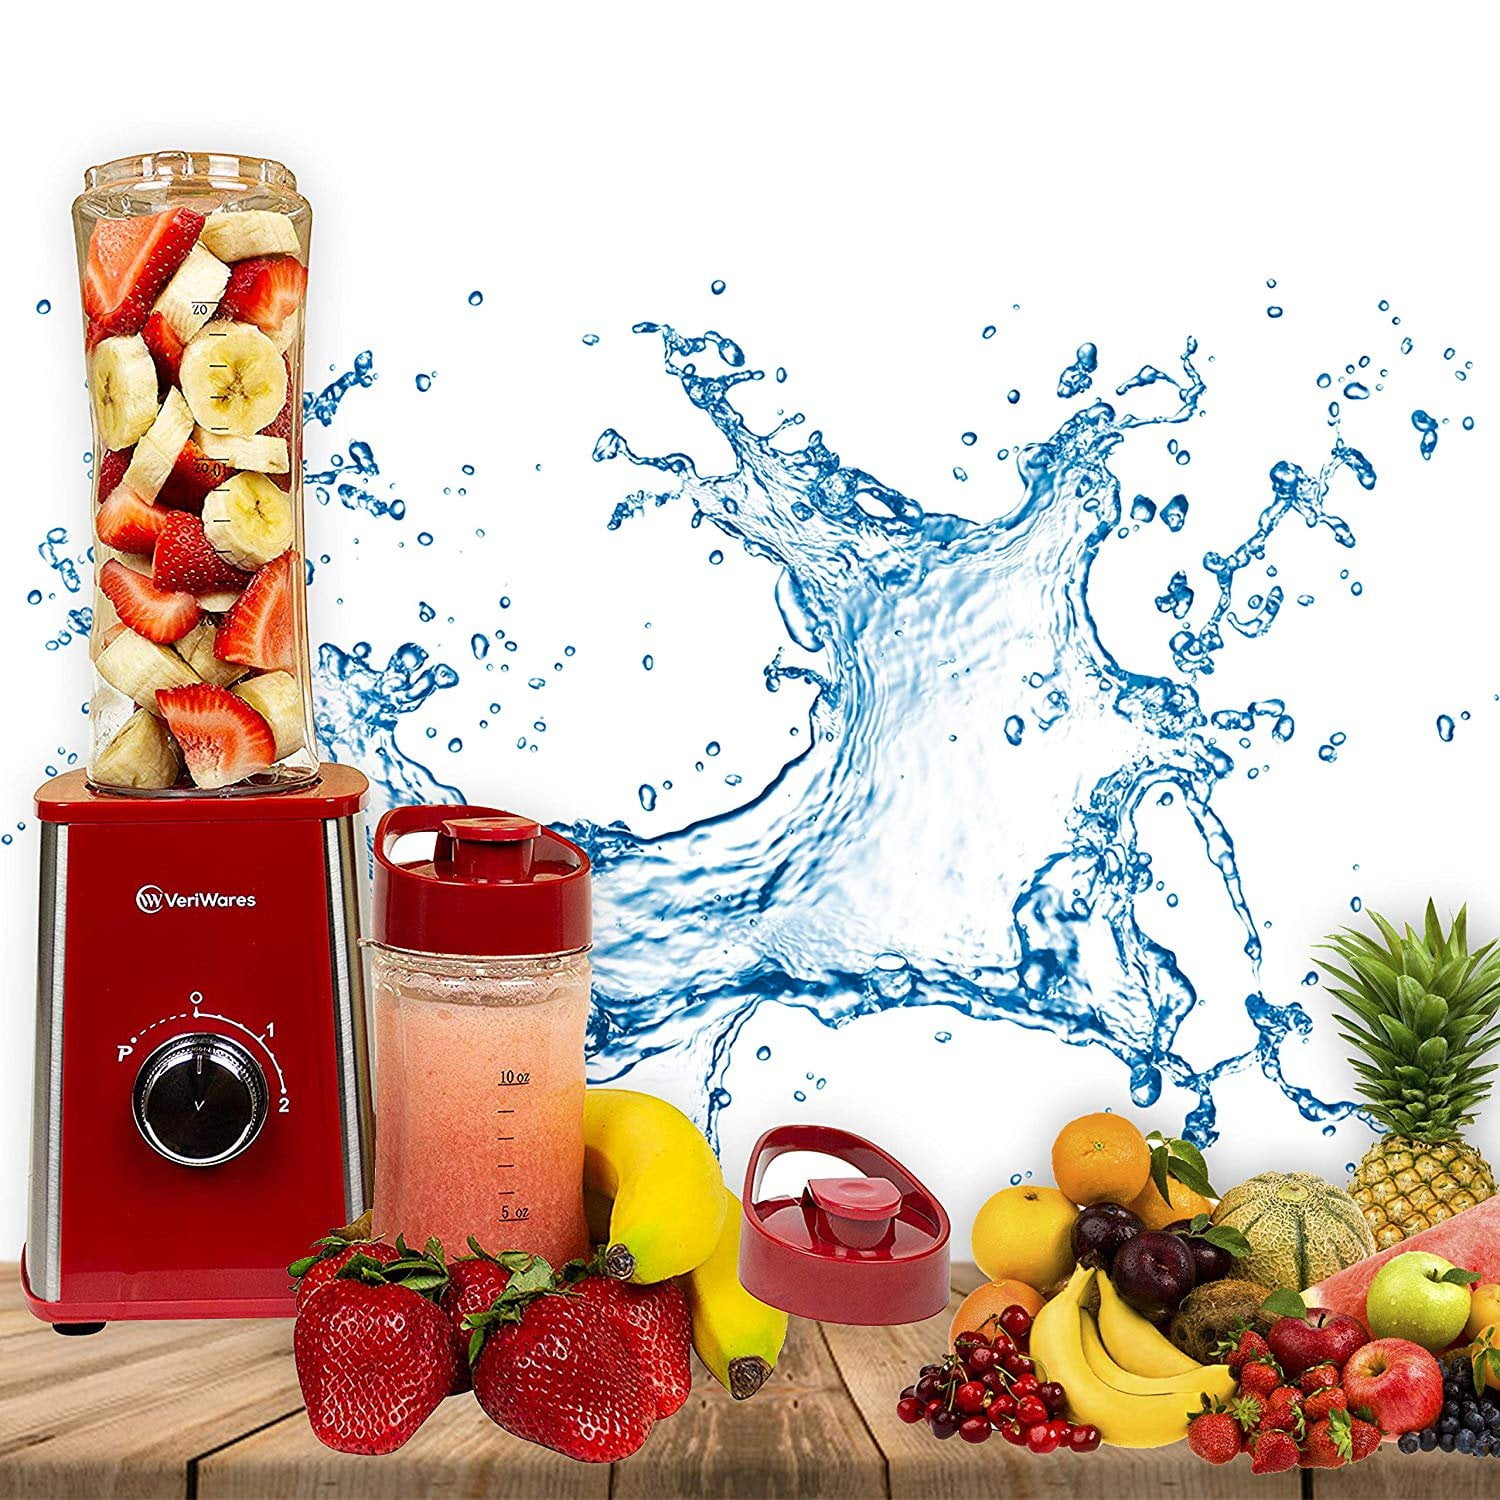 Personal Blender Shakes and smoothies Portable 2-Speed Motor and 3 Blades Good for Travel Practical and Compact Design Smoothie Maker 2 Leak-Proof BPA-Free Bottles with Oz Marks Red - Walmart.com